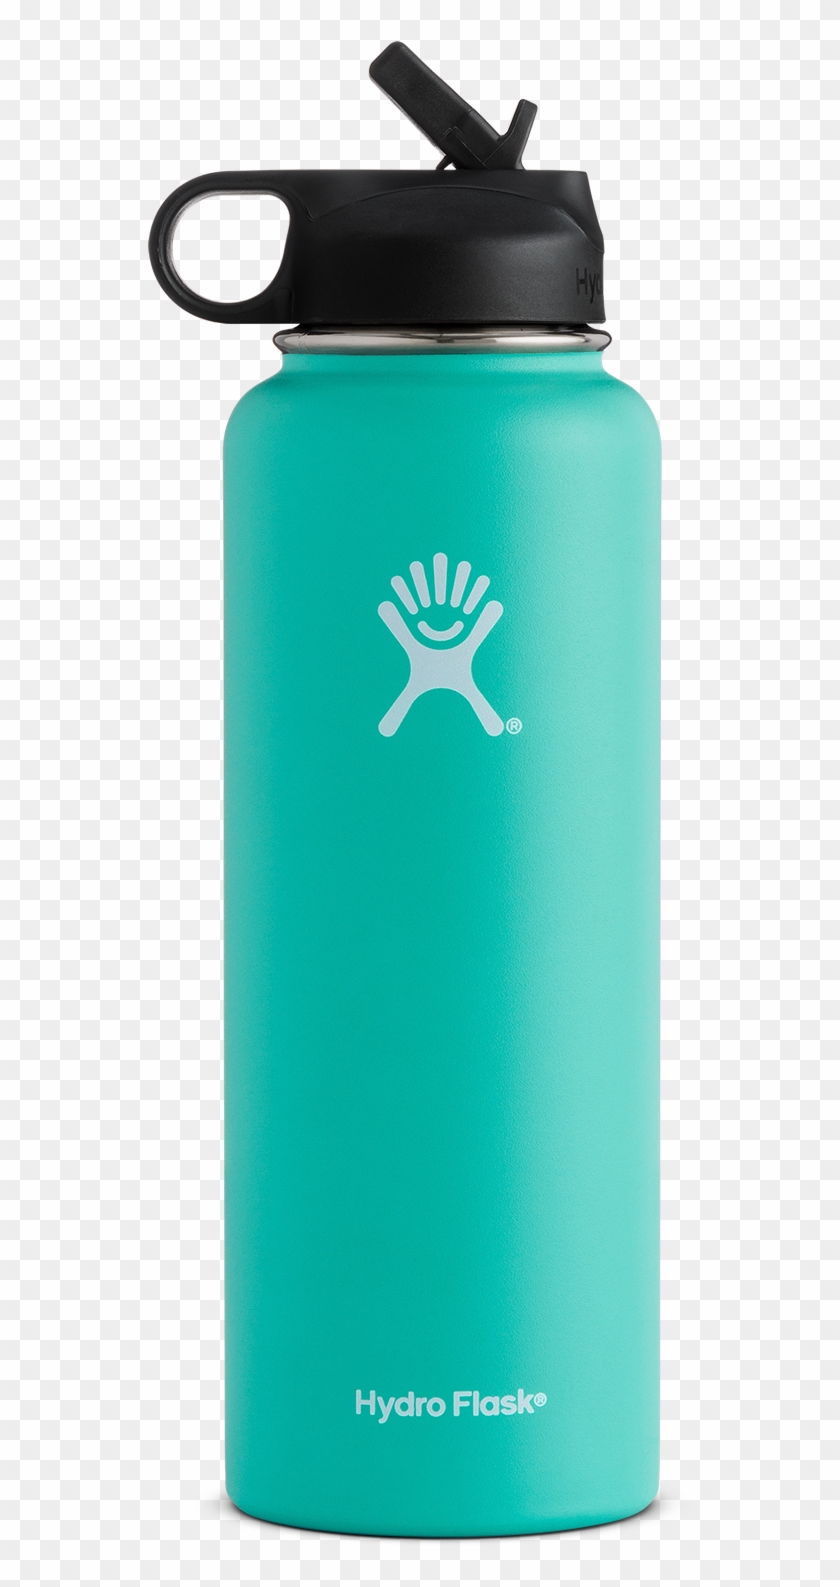 Hydro Flask 40oz Wide Mouth Insulated Water Bottle - Hydro Flask With Straw Clipart #3924881